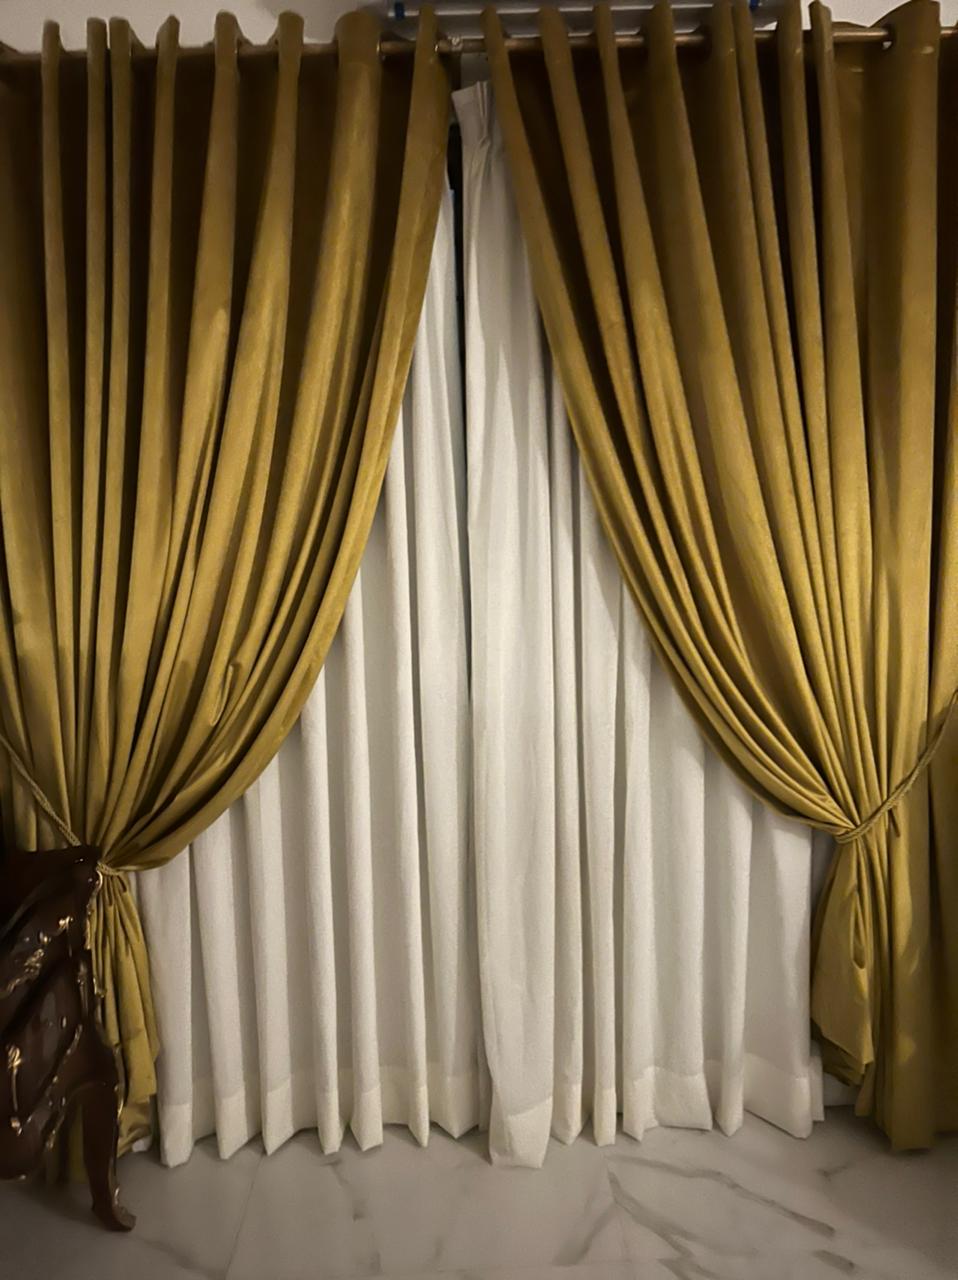 How Custom Luxury Drapes Online Can Transform Your Home Decor